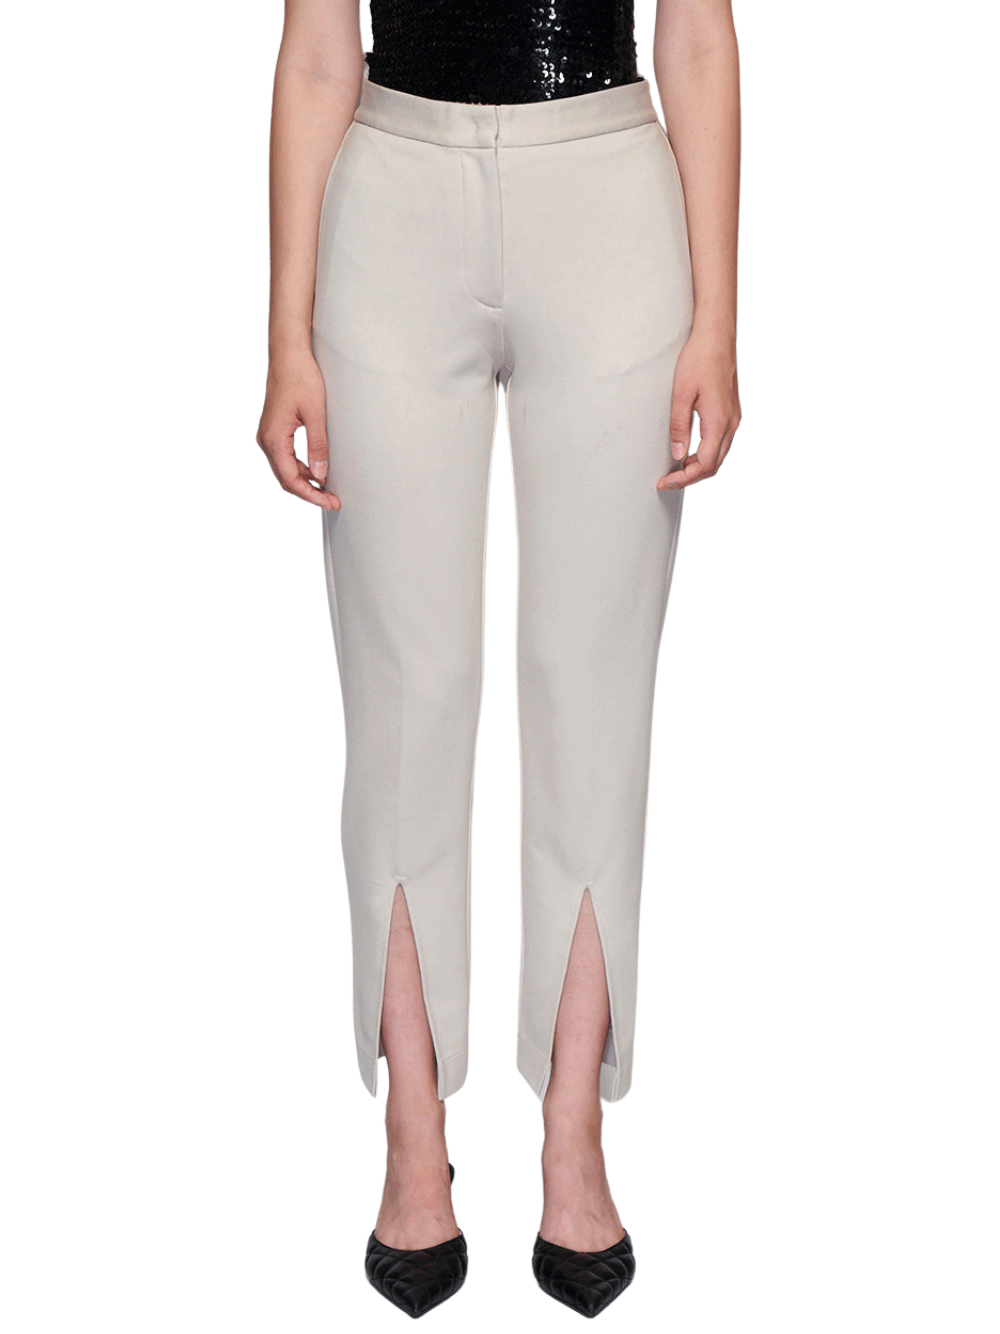 CK-CALVIN-KLEIN-LIGHT-PONTE-TAILORED-PANTS-WITH-FRONT-SLIT-NATURAL-1